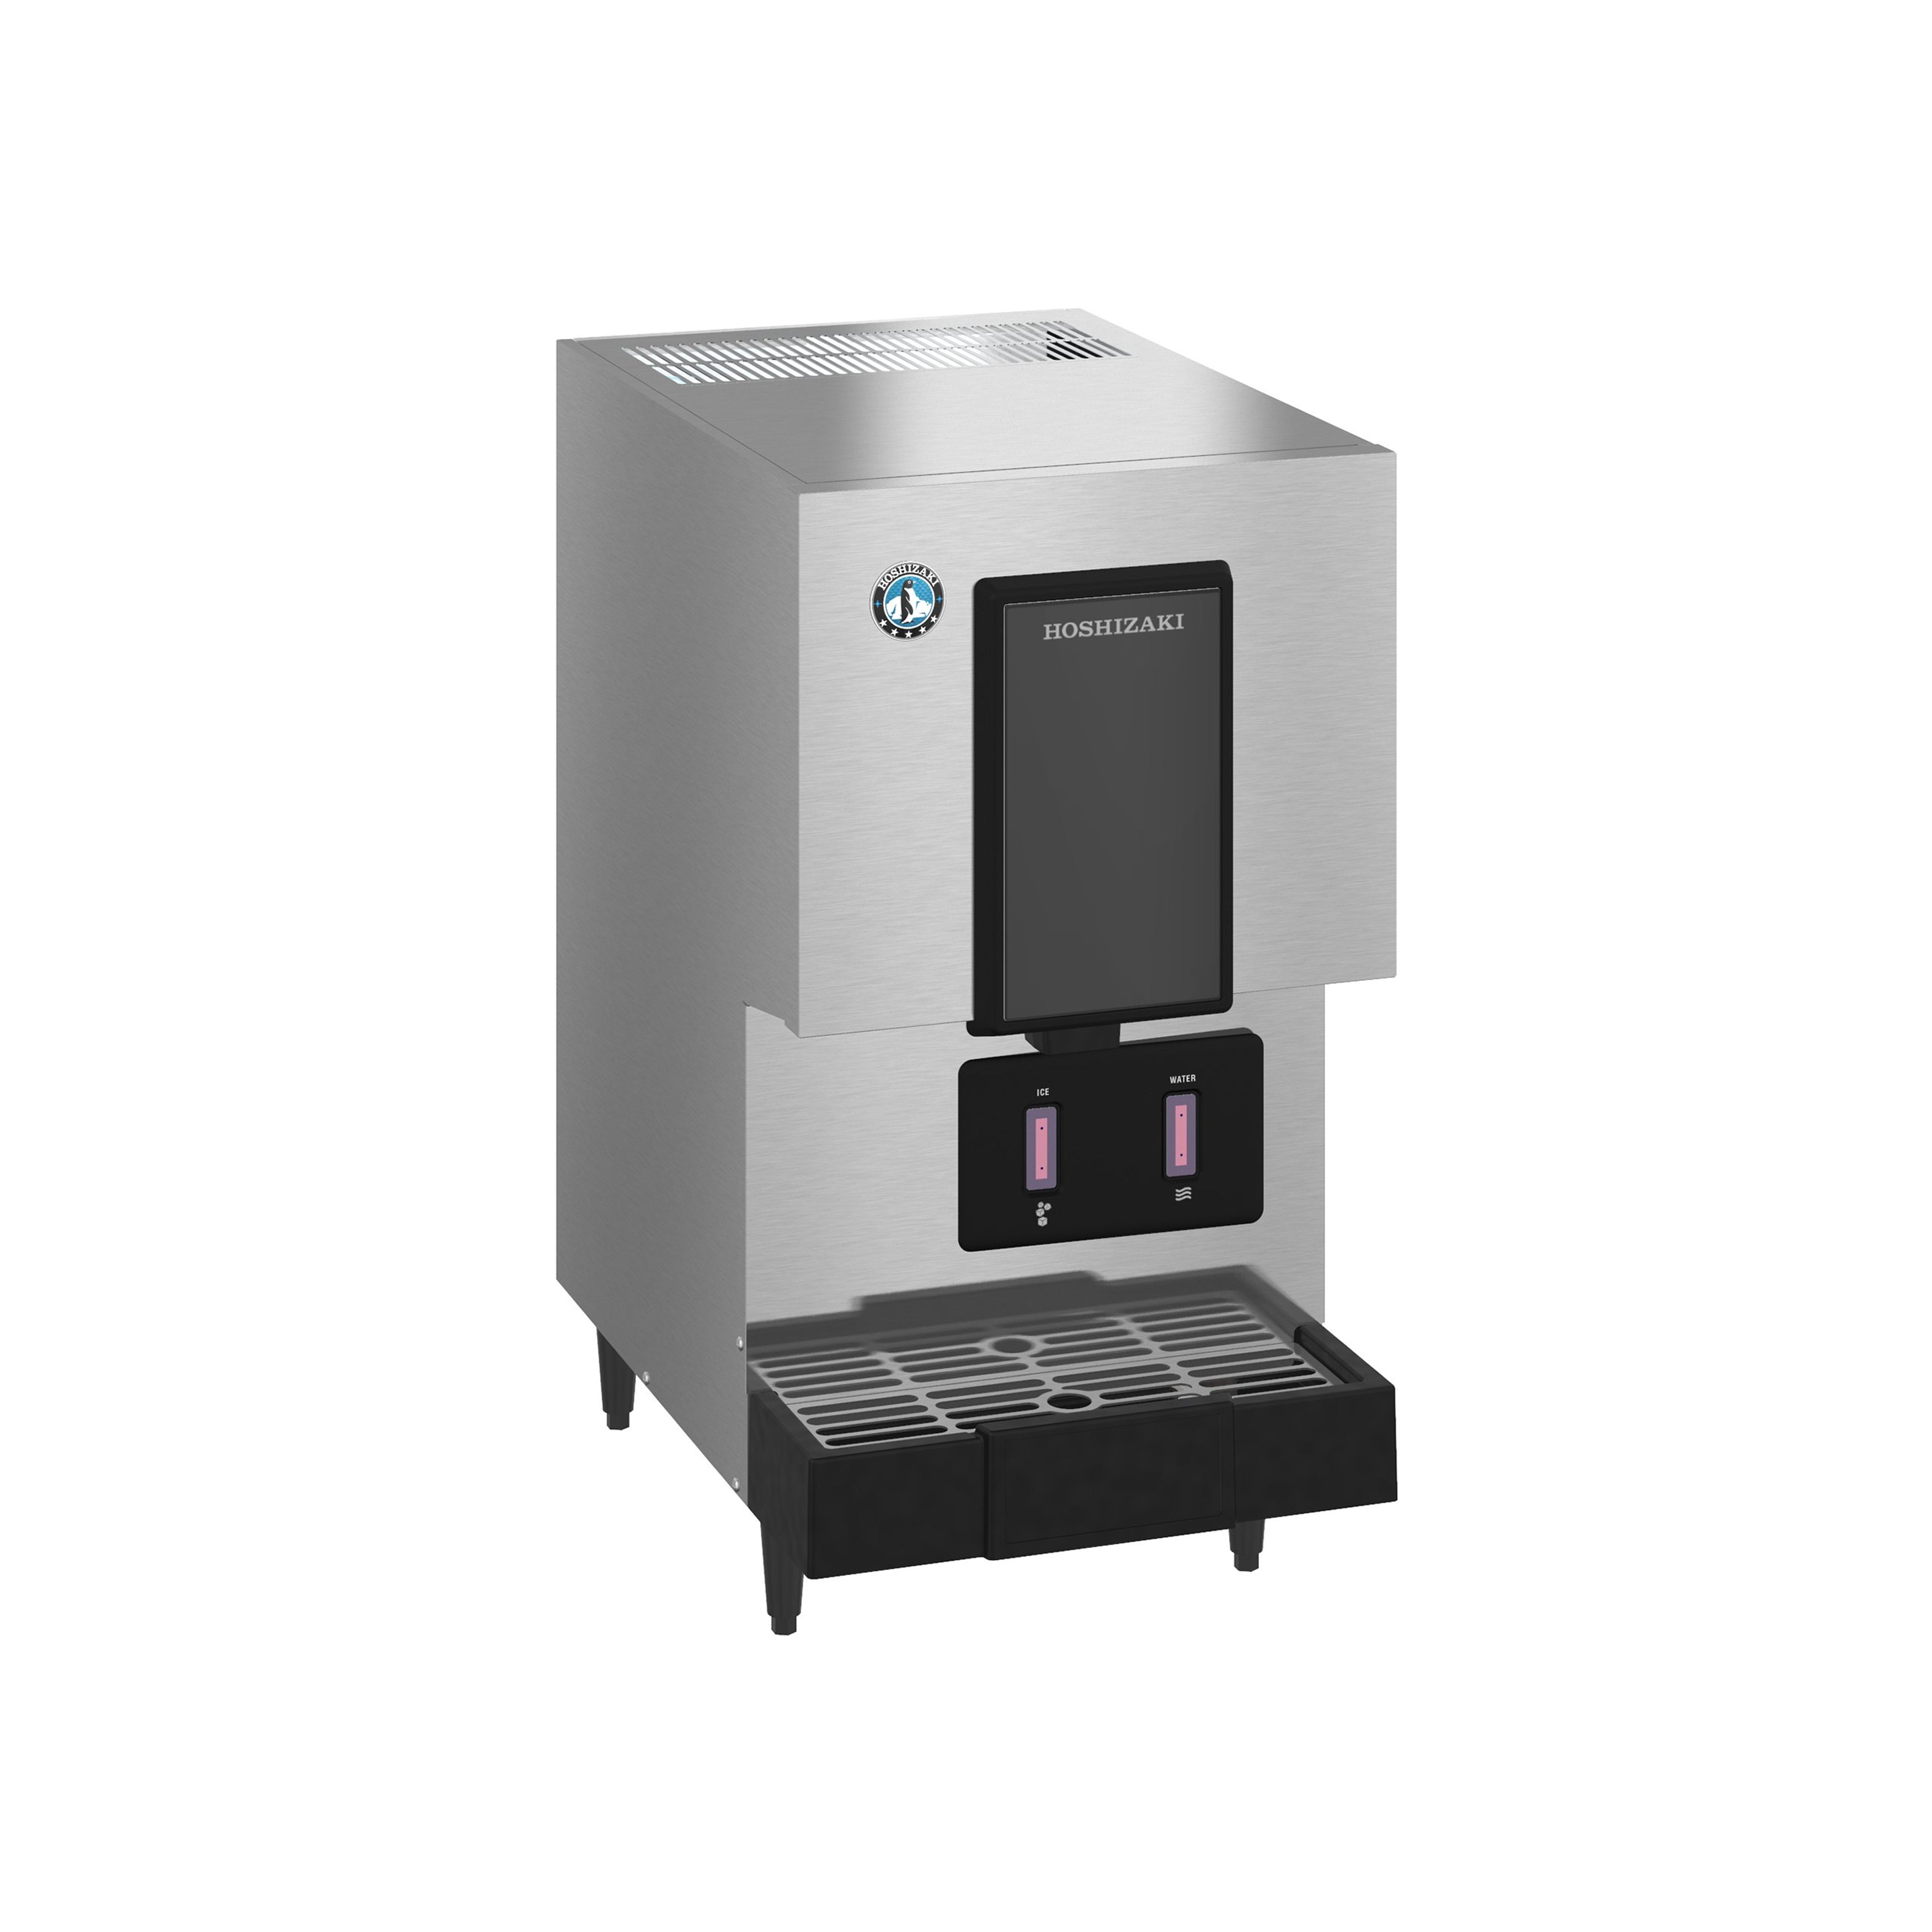 Hoshizaki - DCM-271BAH-OS, Commercial Opti-Serve Countertop Ice Maker and Water Dispenser - 10 lb. Storage Air Cooled